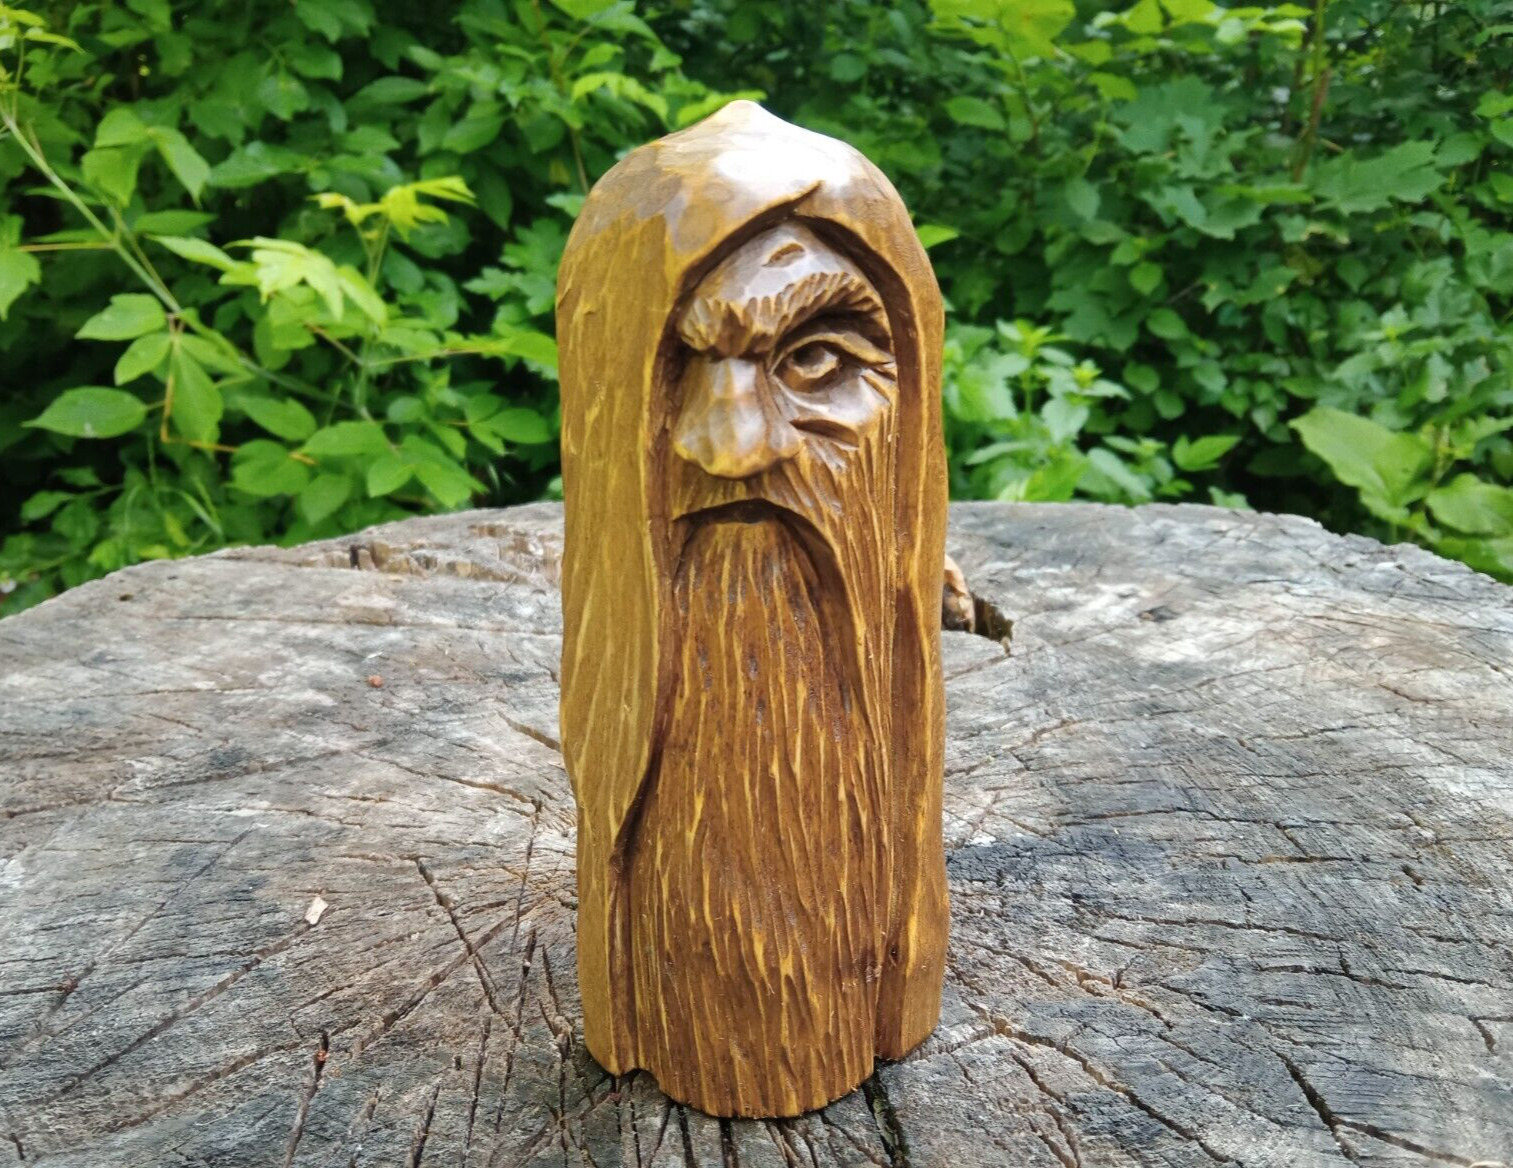 Odin statue. Statue of Wotan. Idol of Odin in wood. Wood carving. Odin viking